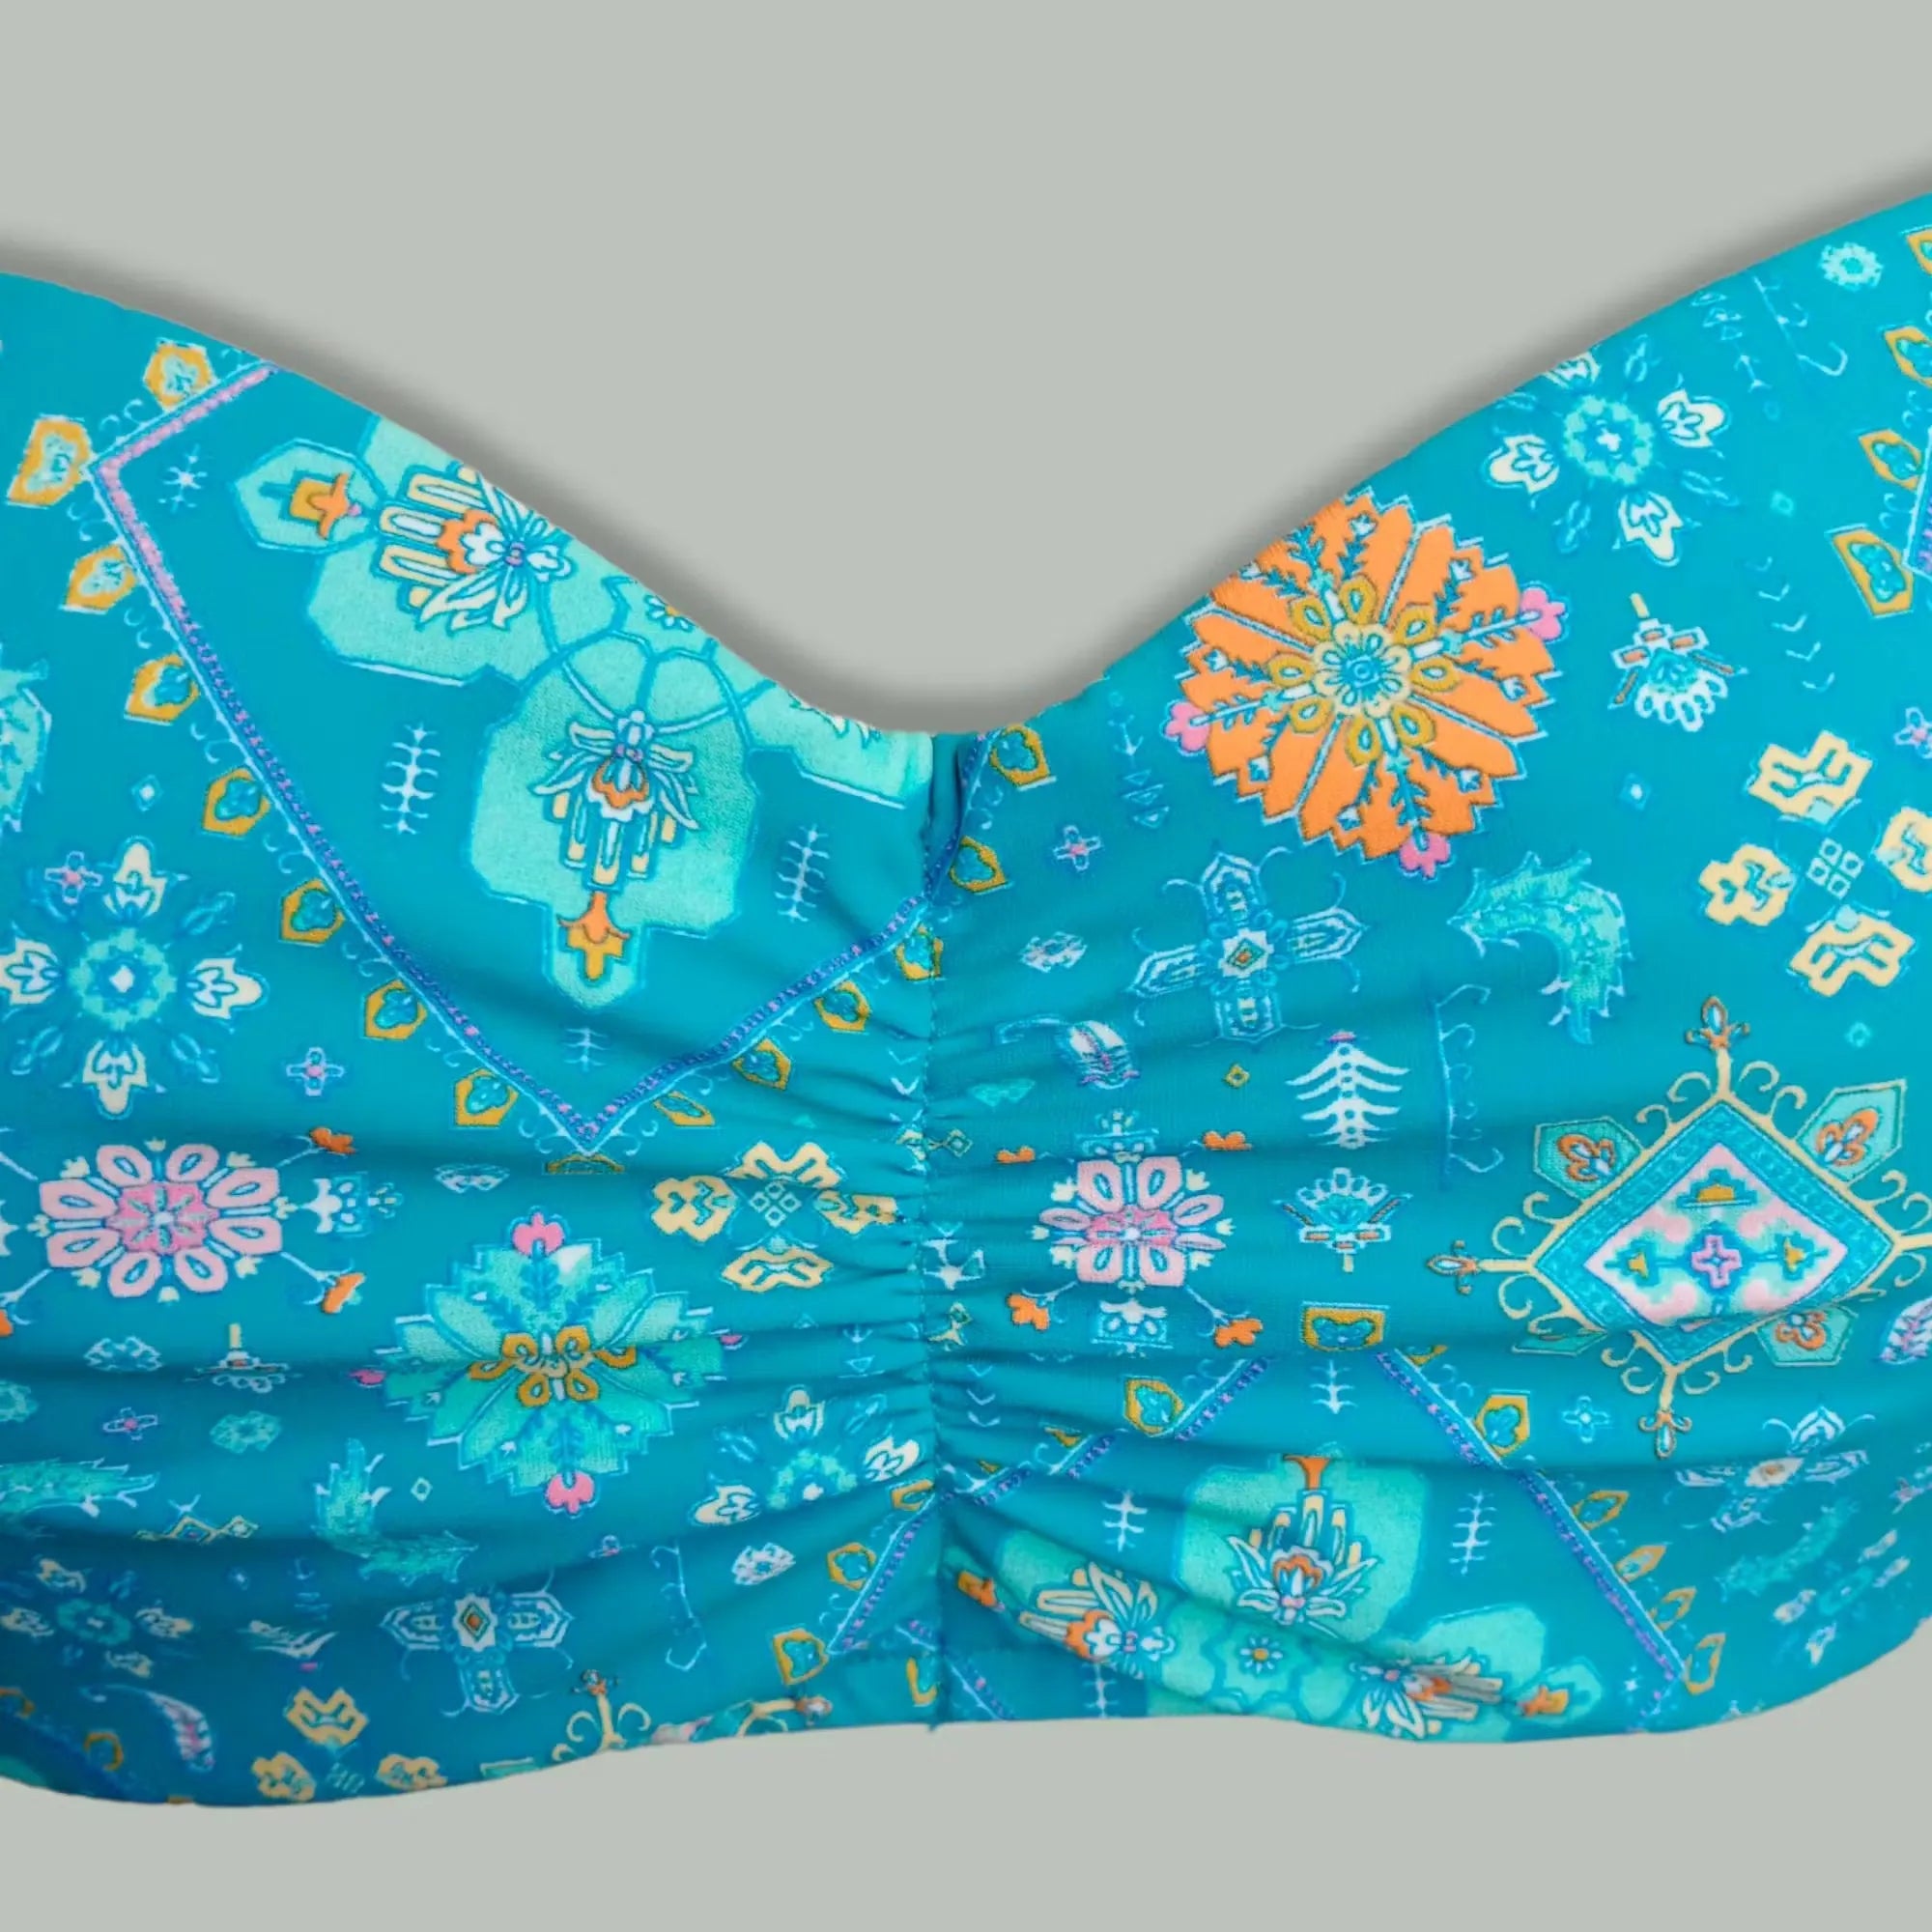 Seafolly Floral Blue Strapless Underwire Bikini Top features a vibrant floral print and provides reliable support for all-day comfort. Shop on Dubailisit!